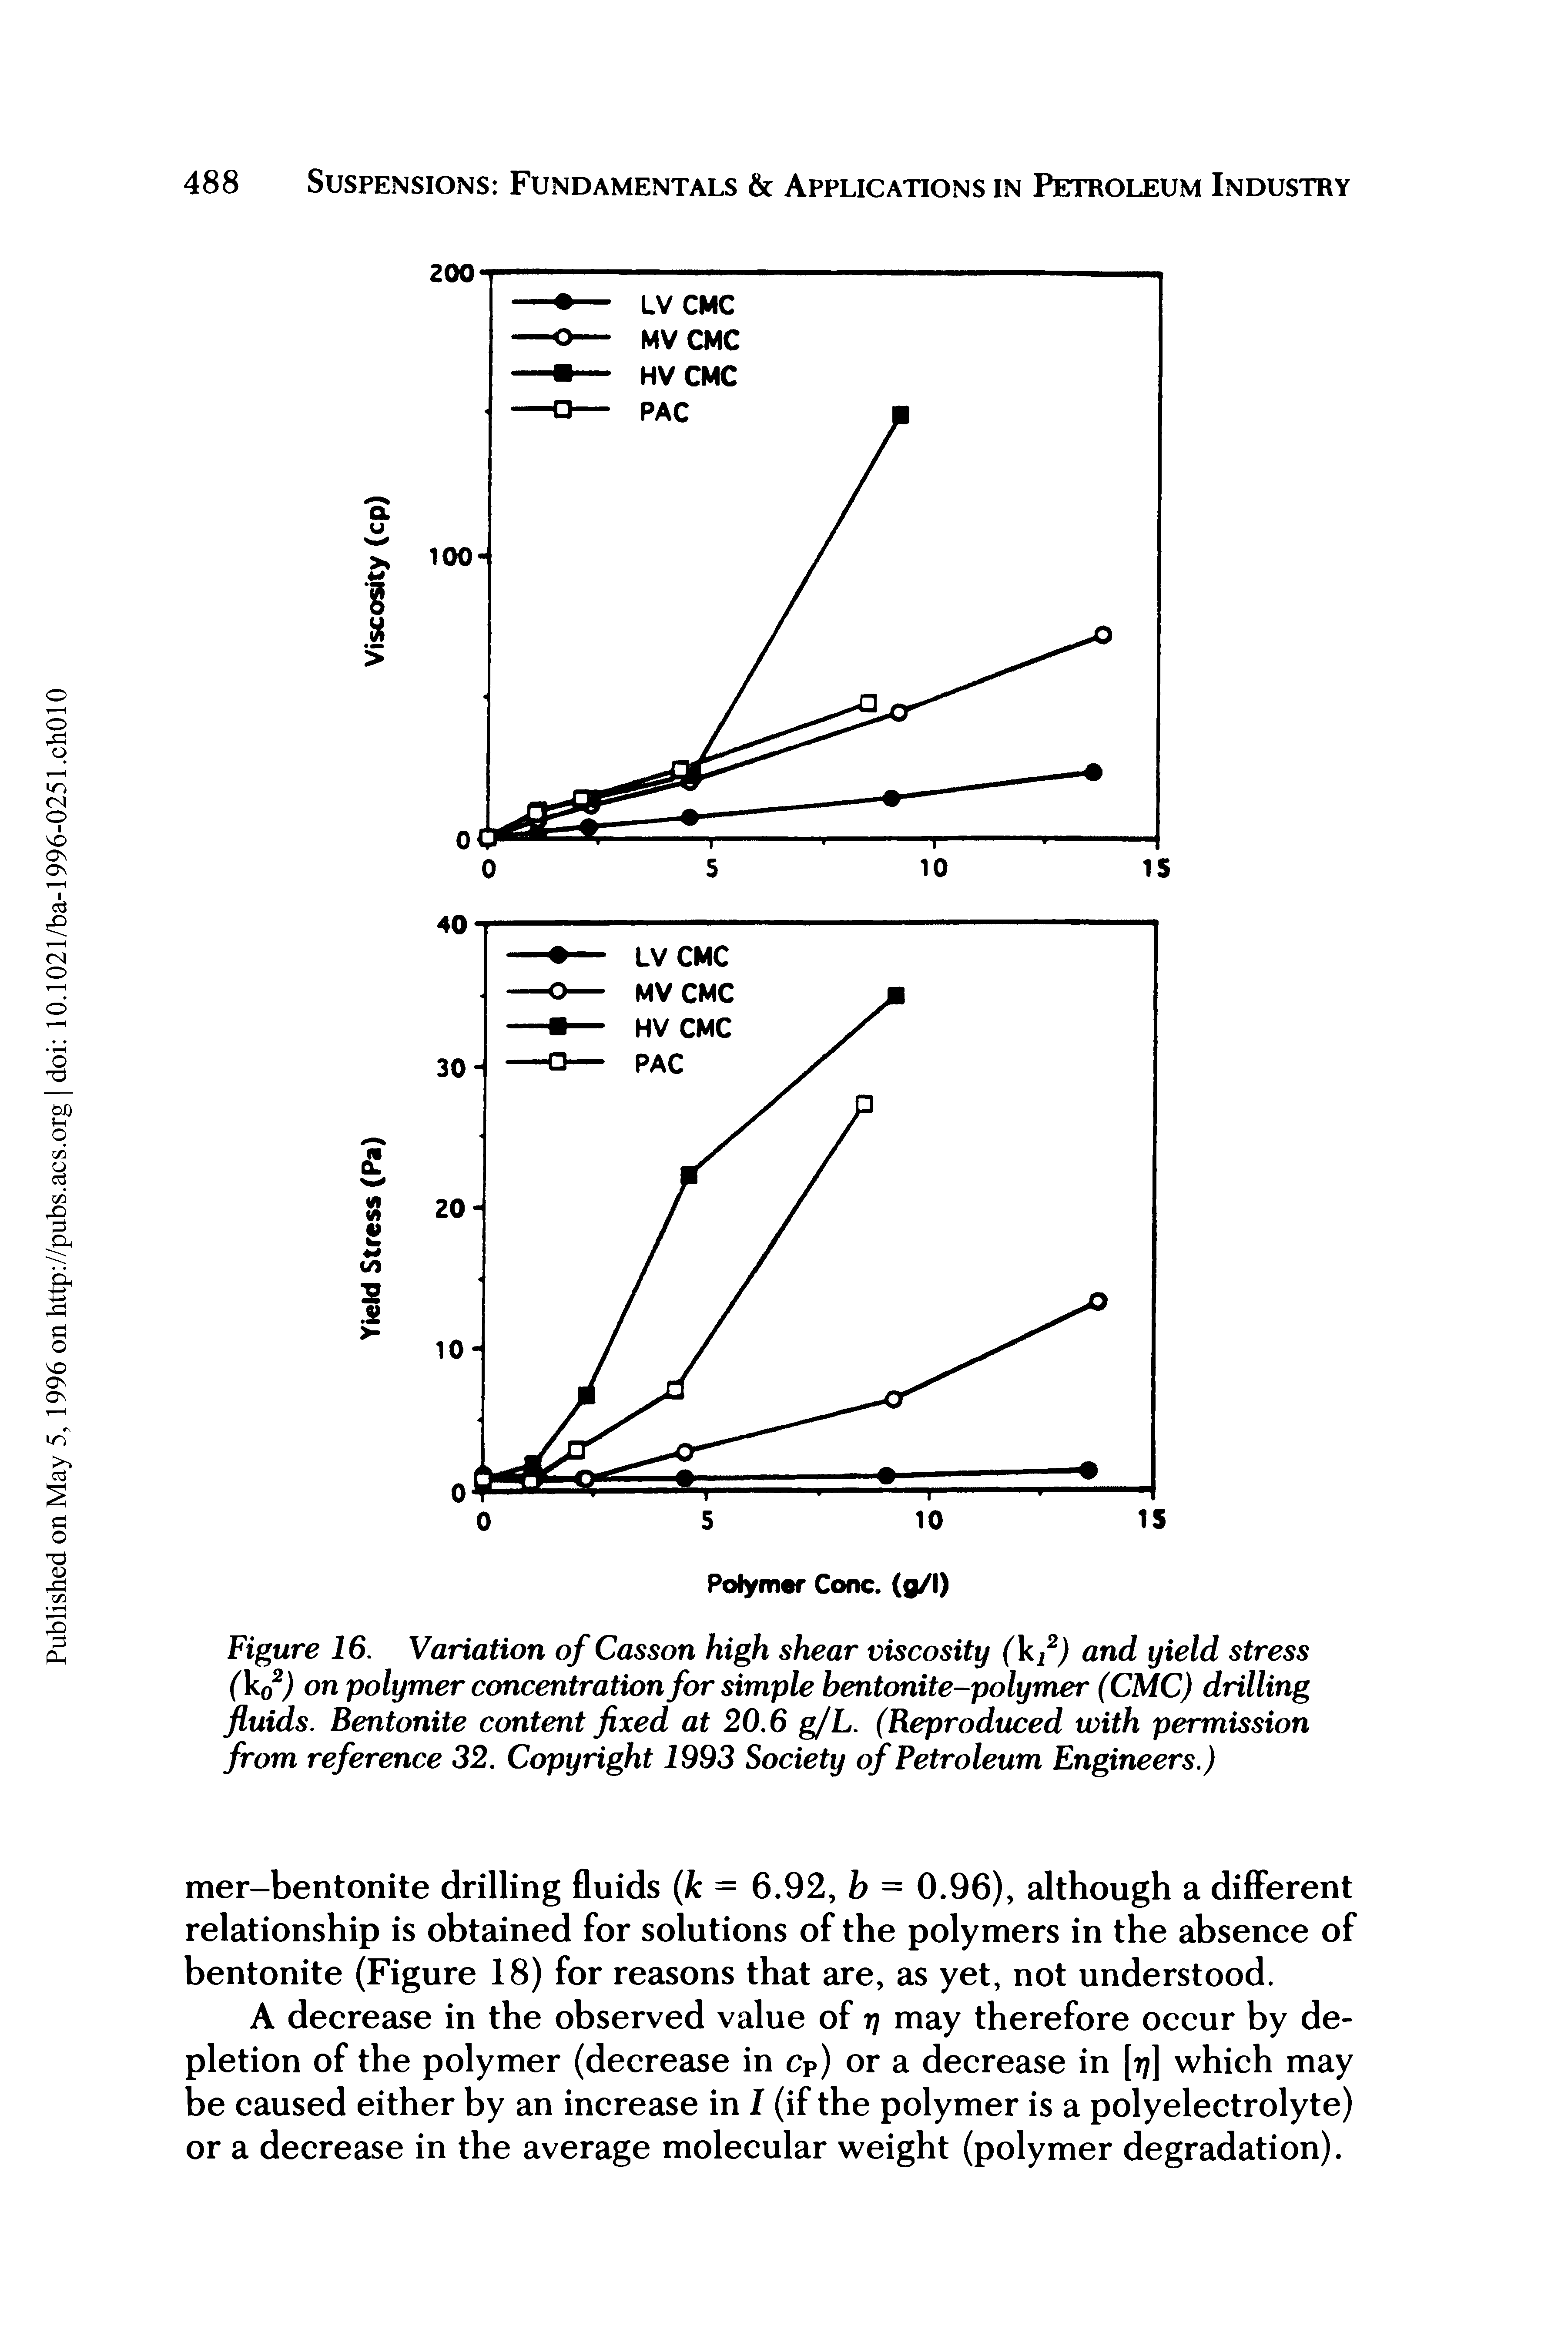 Figure 16. Variation of Casson high shear viscosity (kf) and yield stress (k02) on polymer concentration for simple bentonite-polymer (CMC) drilling fluids. Bentonite content fixed at 20.6 g/L. (Reproduced with permission from reference 32. Copyright 1993 Society of Petroleum Engineers.)...